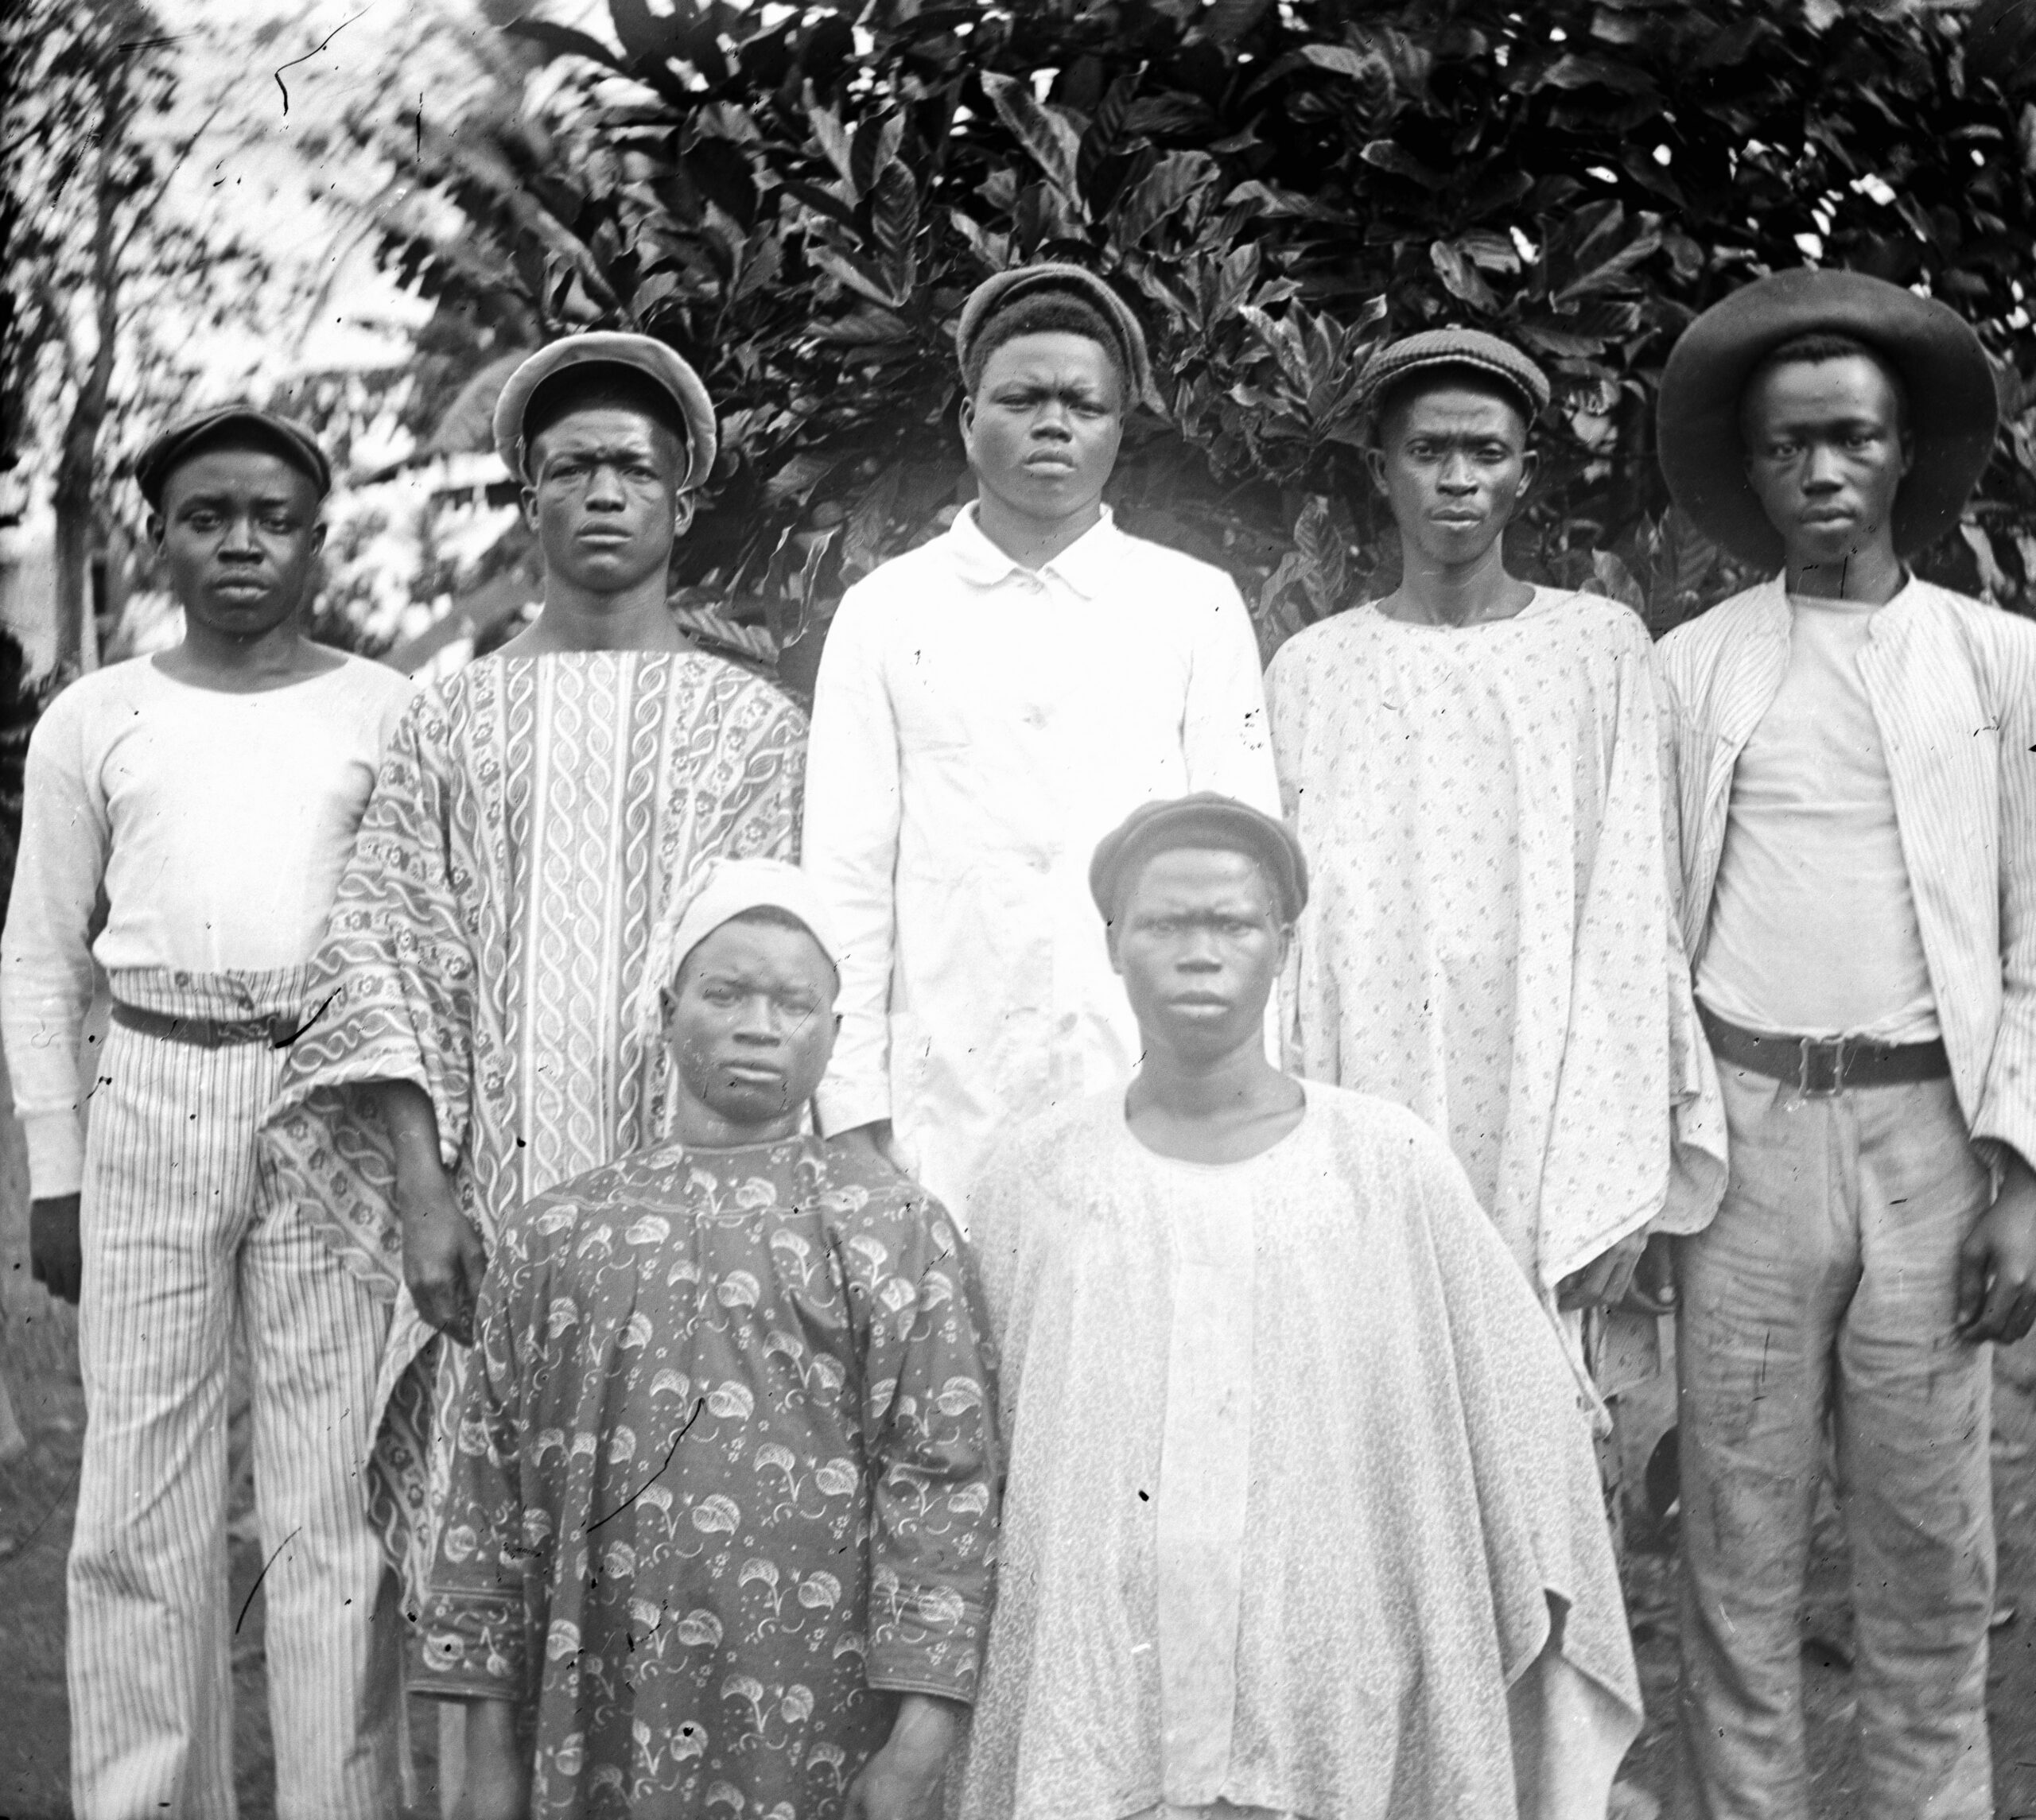 A picture of a group of slaves looking into the camera with straight faces